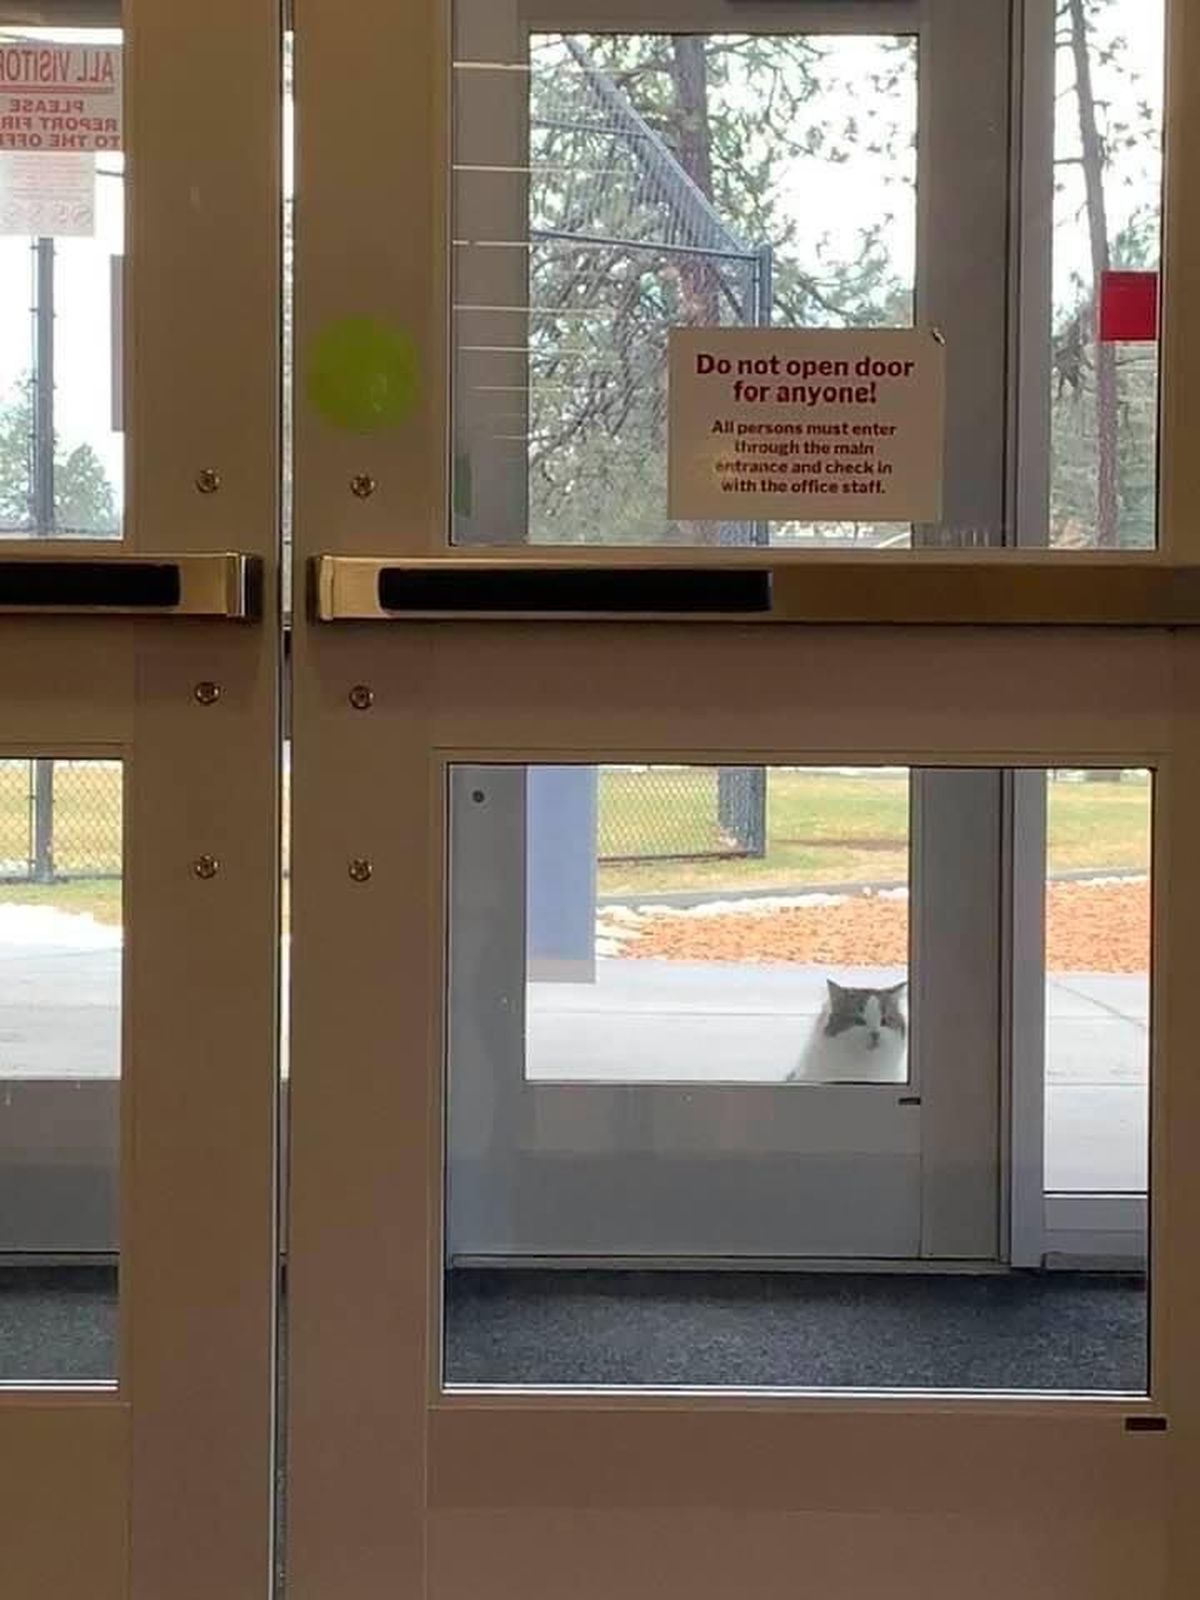 Xander the cat waits for the doors to open into Jefferson Elementary School. A sign posted on the door says "Do not open door for anyone!"  (Courtesy of Anne Walter)